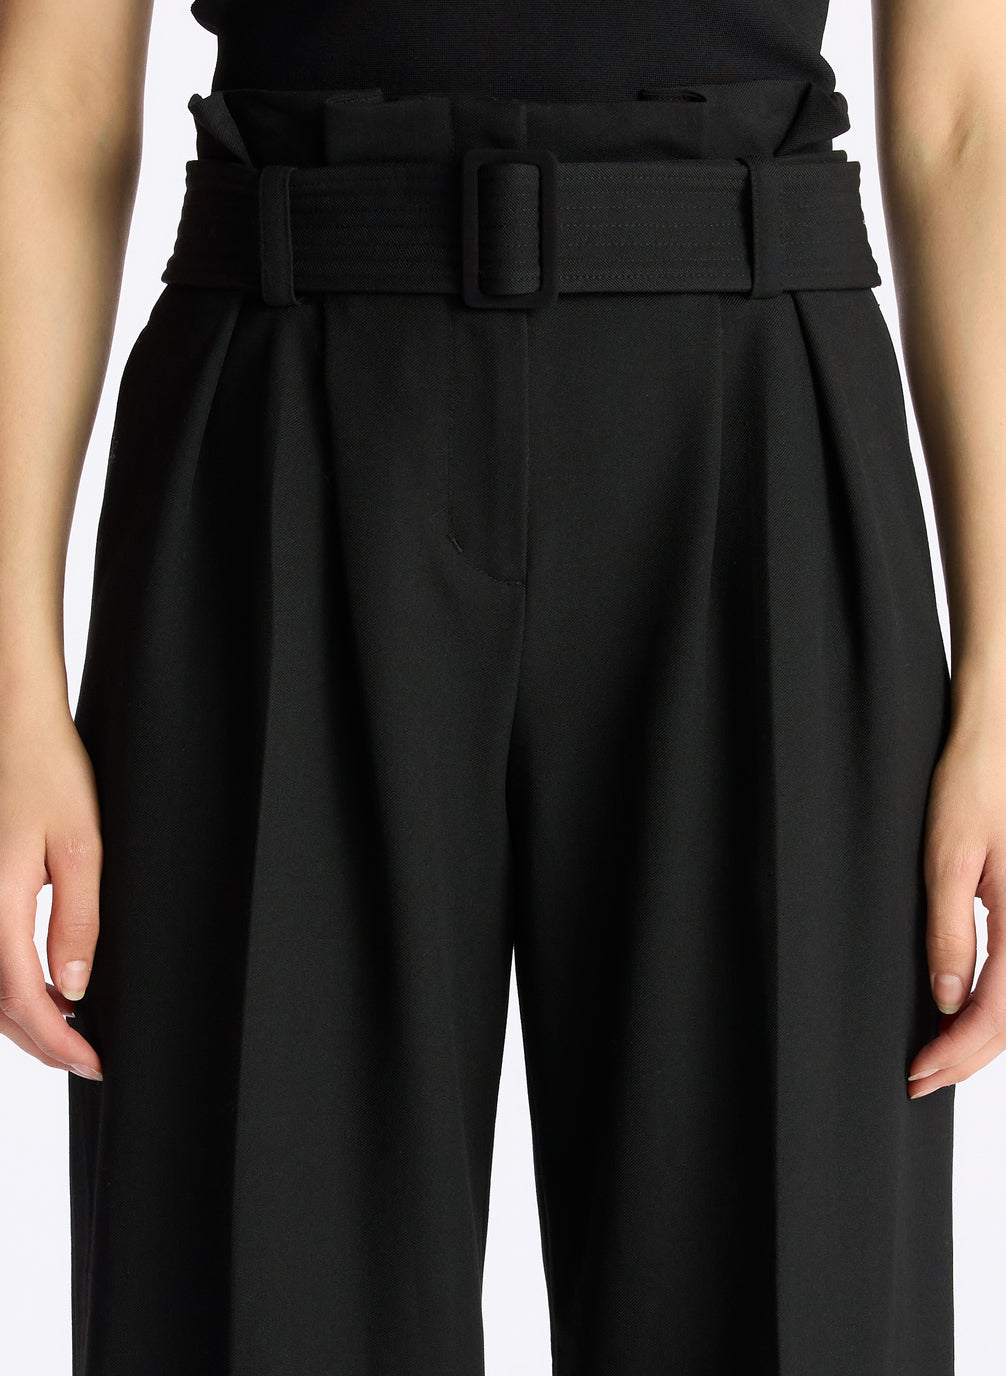 Wilfred Tie Front High Waisted Polyester Belted Pants Black Women's Size 6